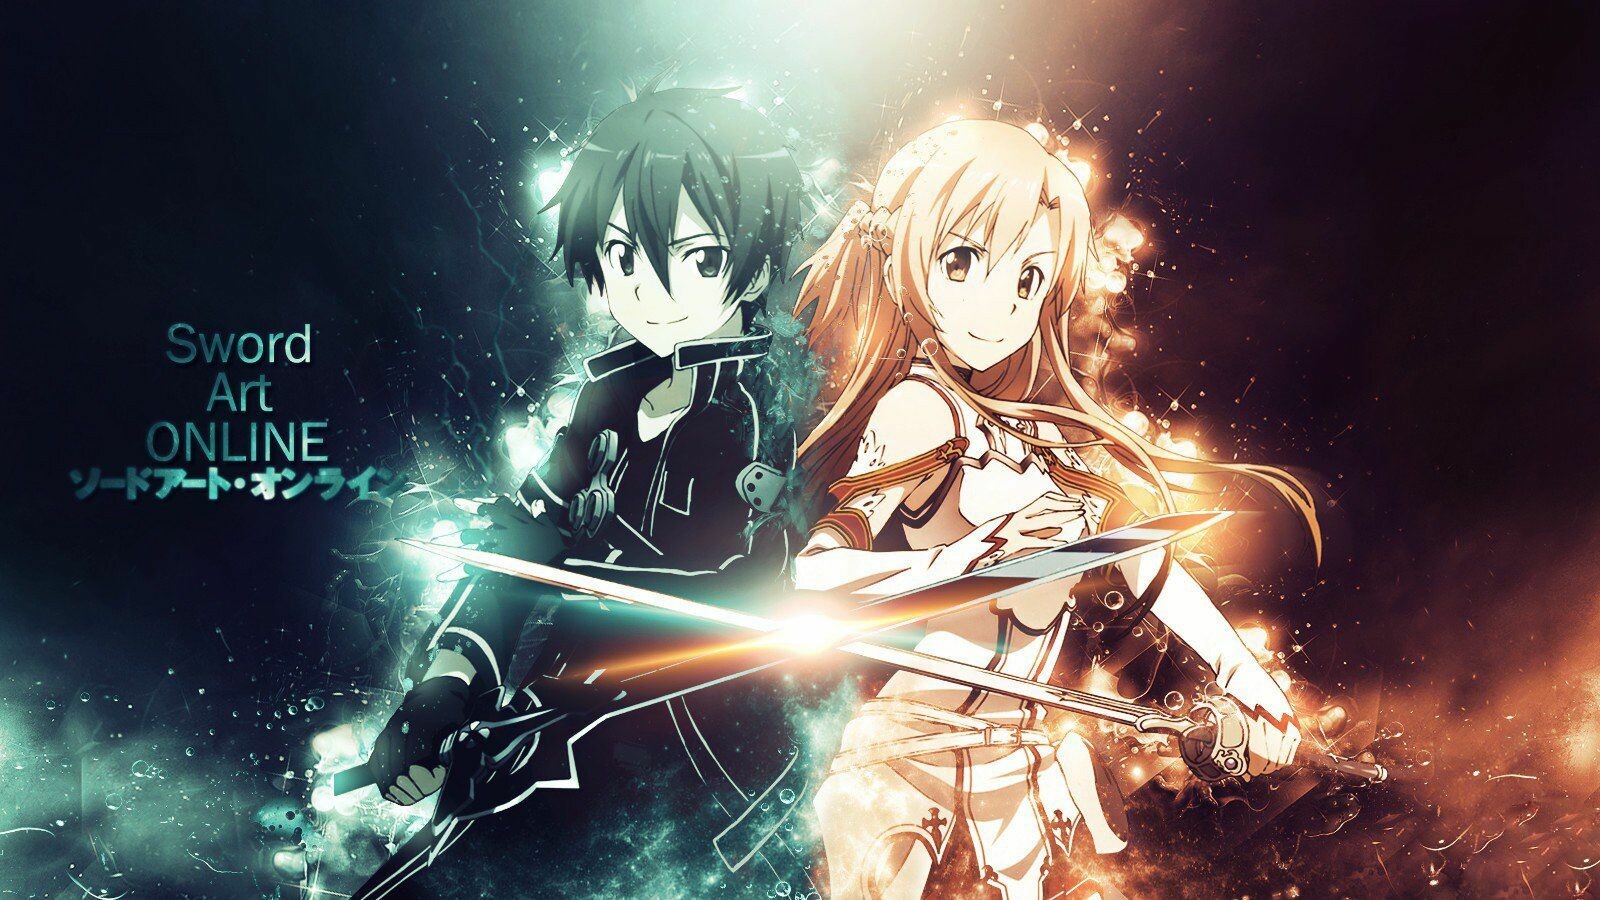 32+ Sword Art Online Wallpapers: HD, 4K, 5K for PC and Mobile | Download  free images for iPhone, Android